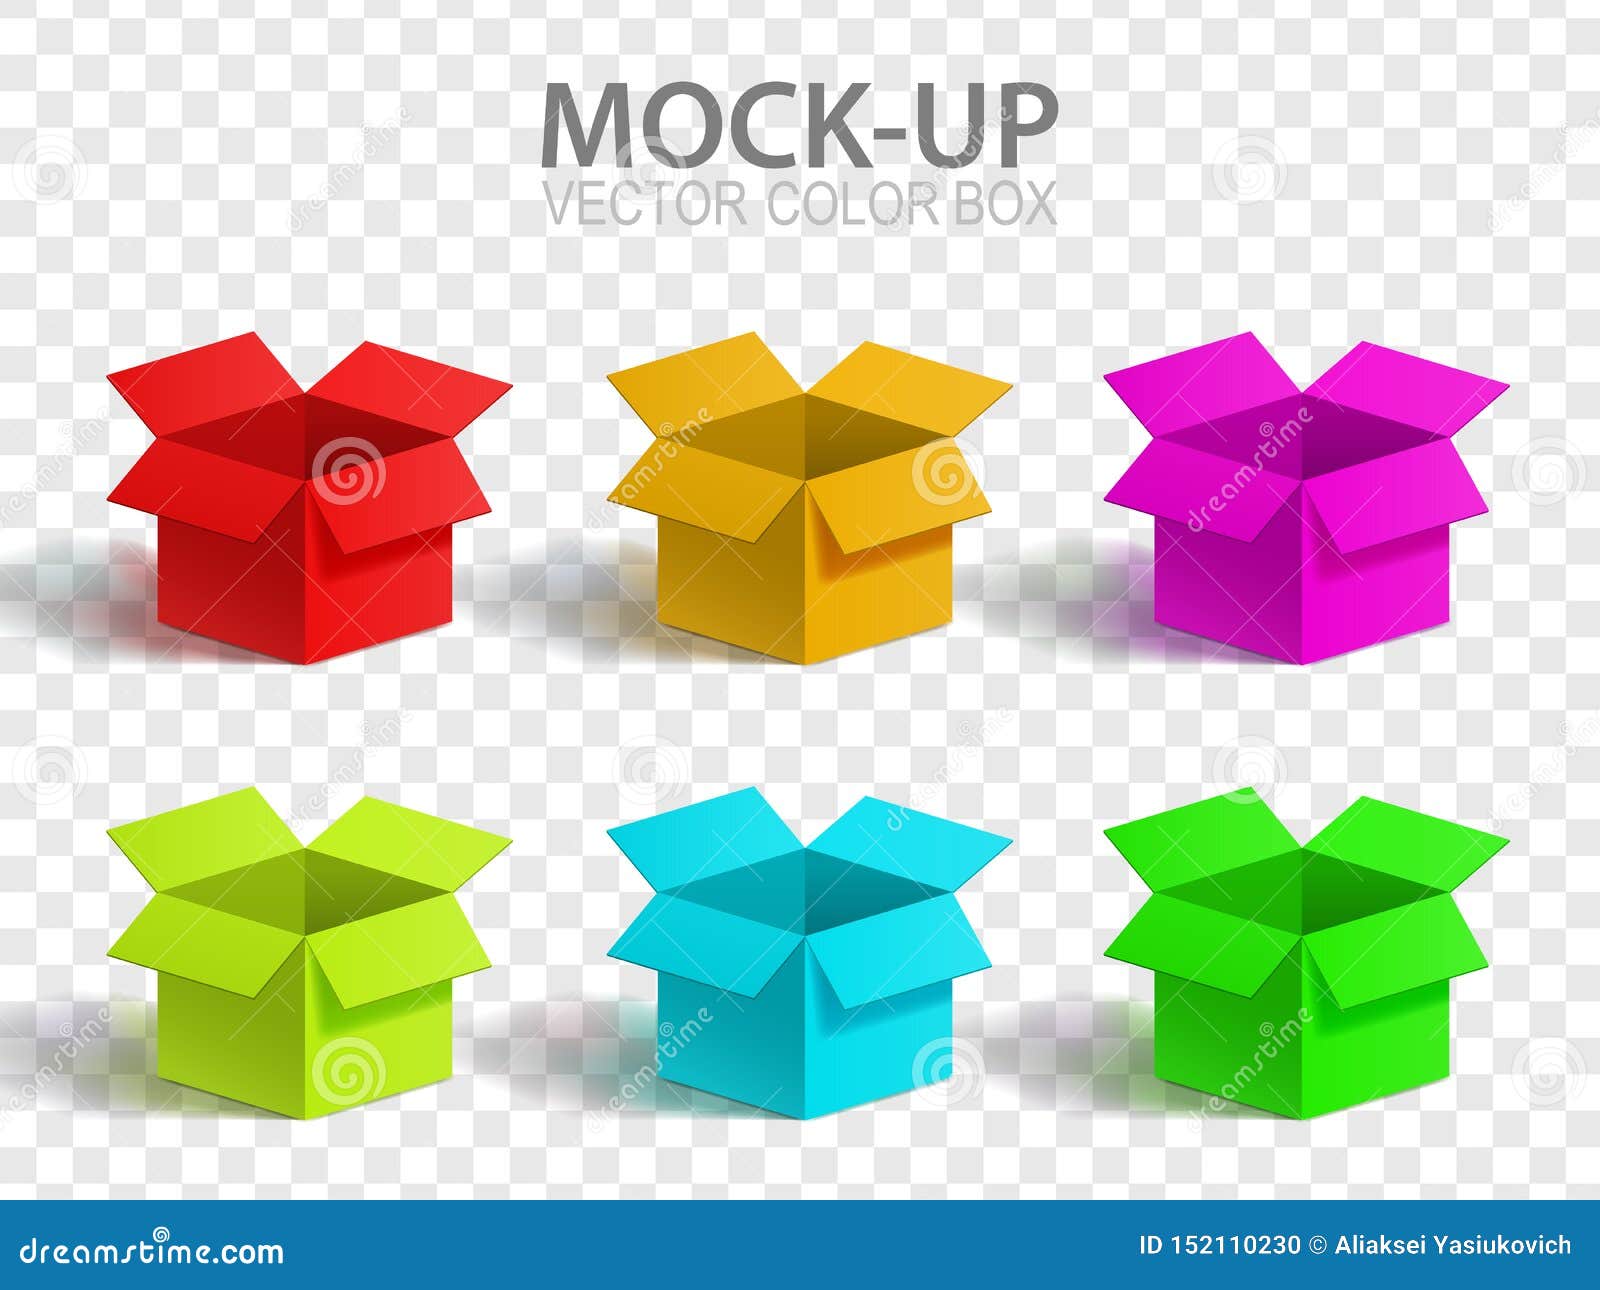 Download Vector mock-up box. stock vector. Illustration of empty ...